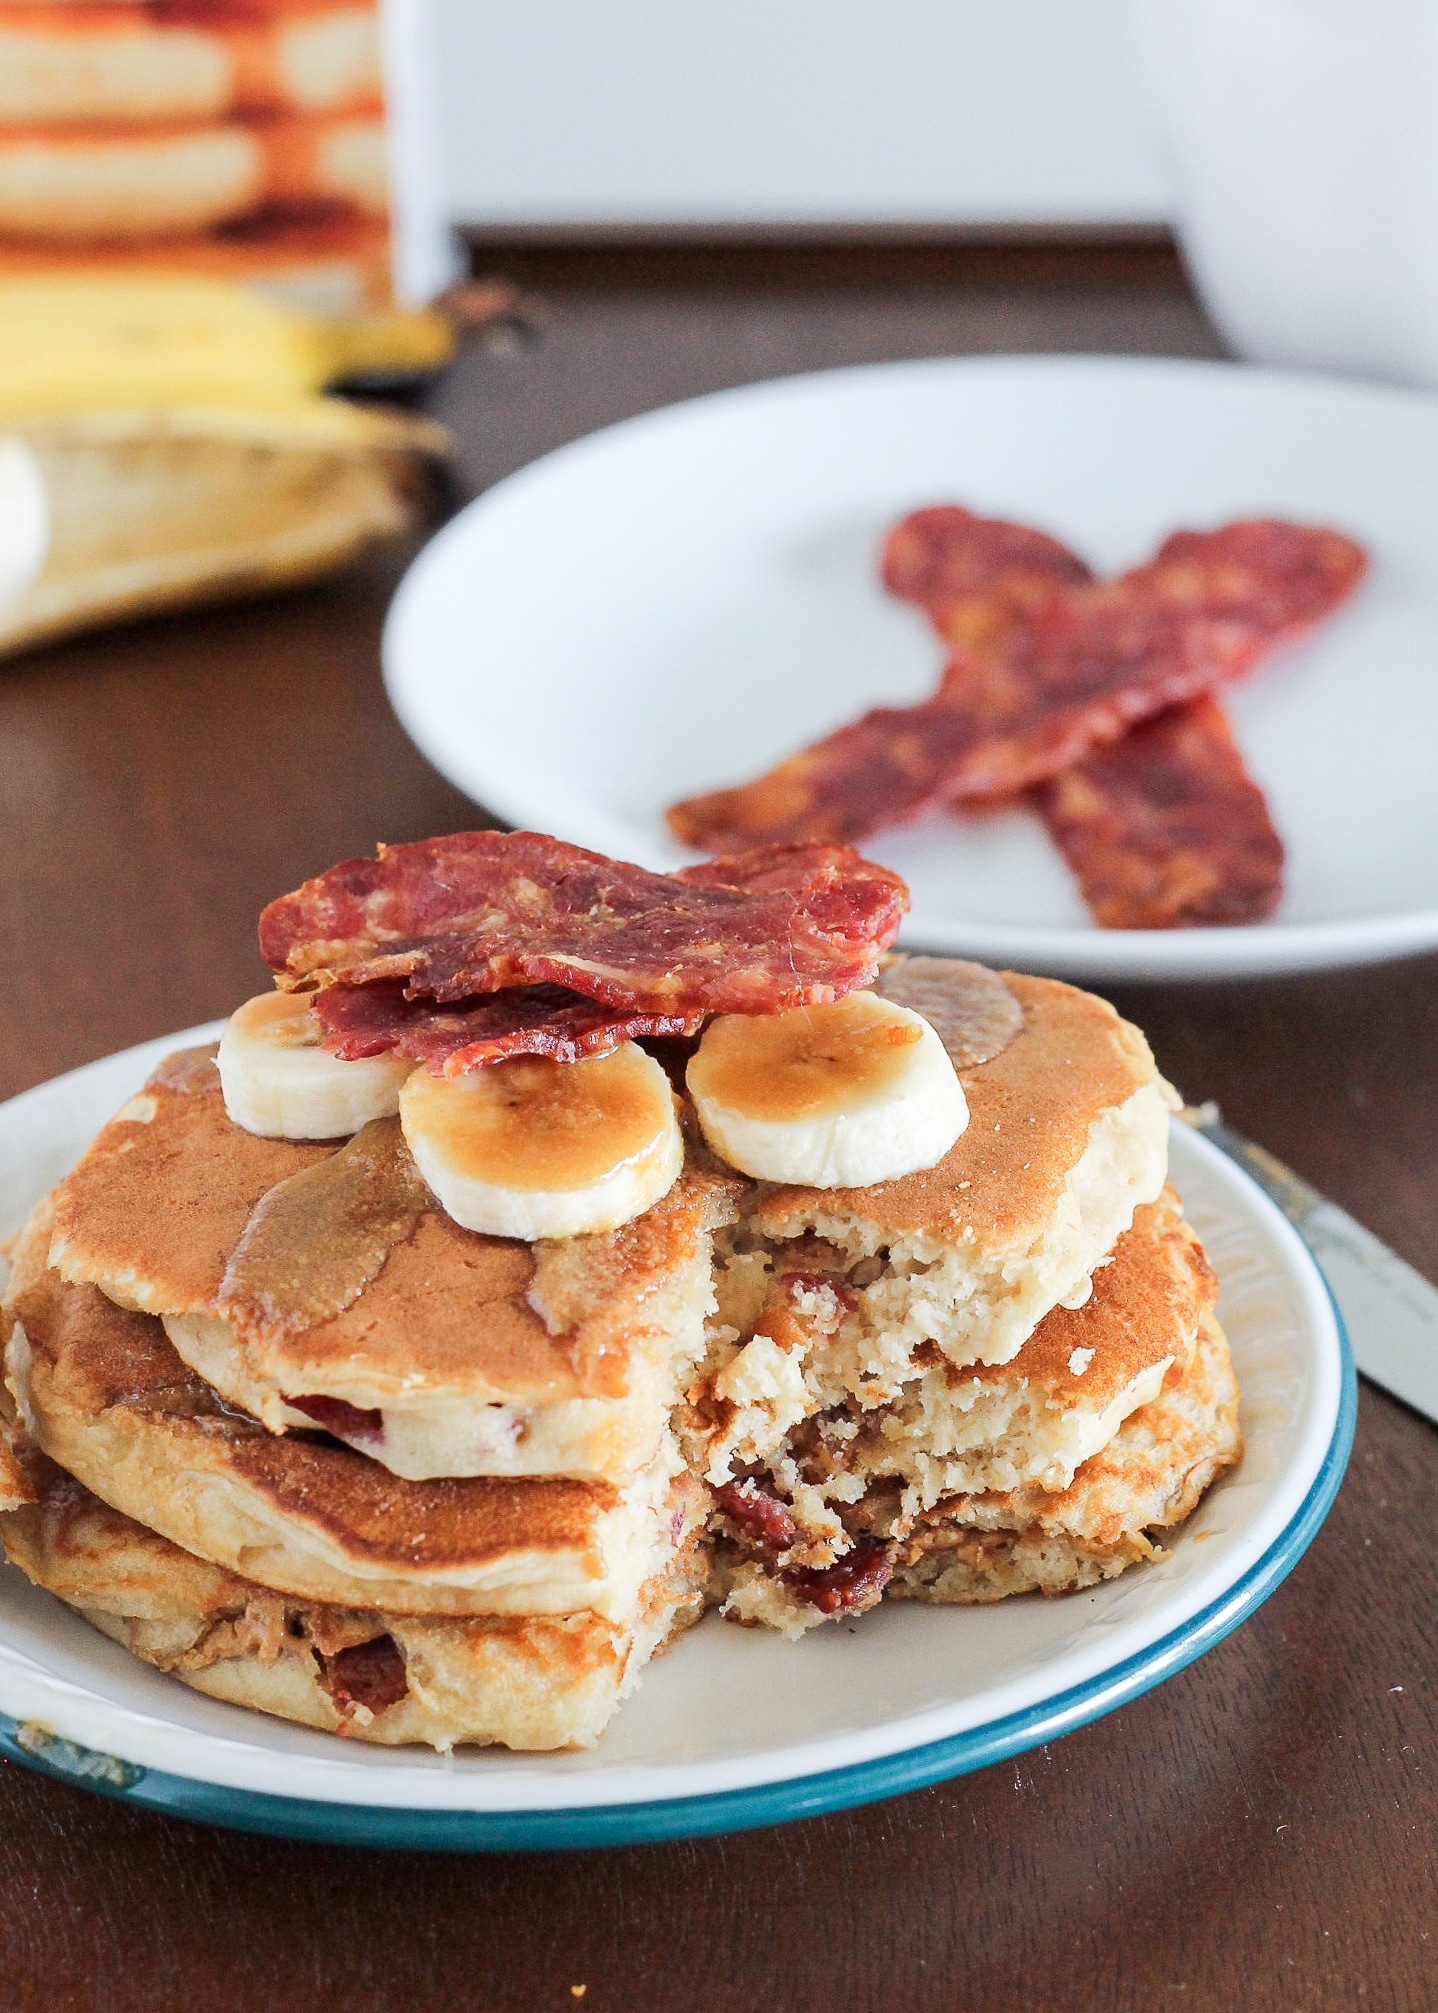 These Elvis Pancakes are banana peanut butter pancakes stuffed with peanut butter and bacon. These are the ultimate breakfast treat - made with only 4 ingredients!